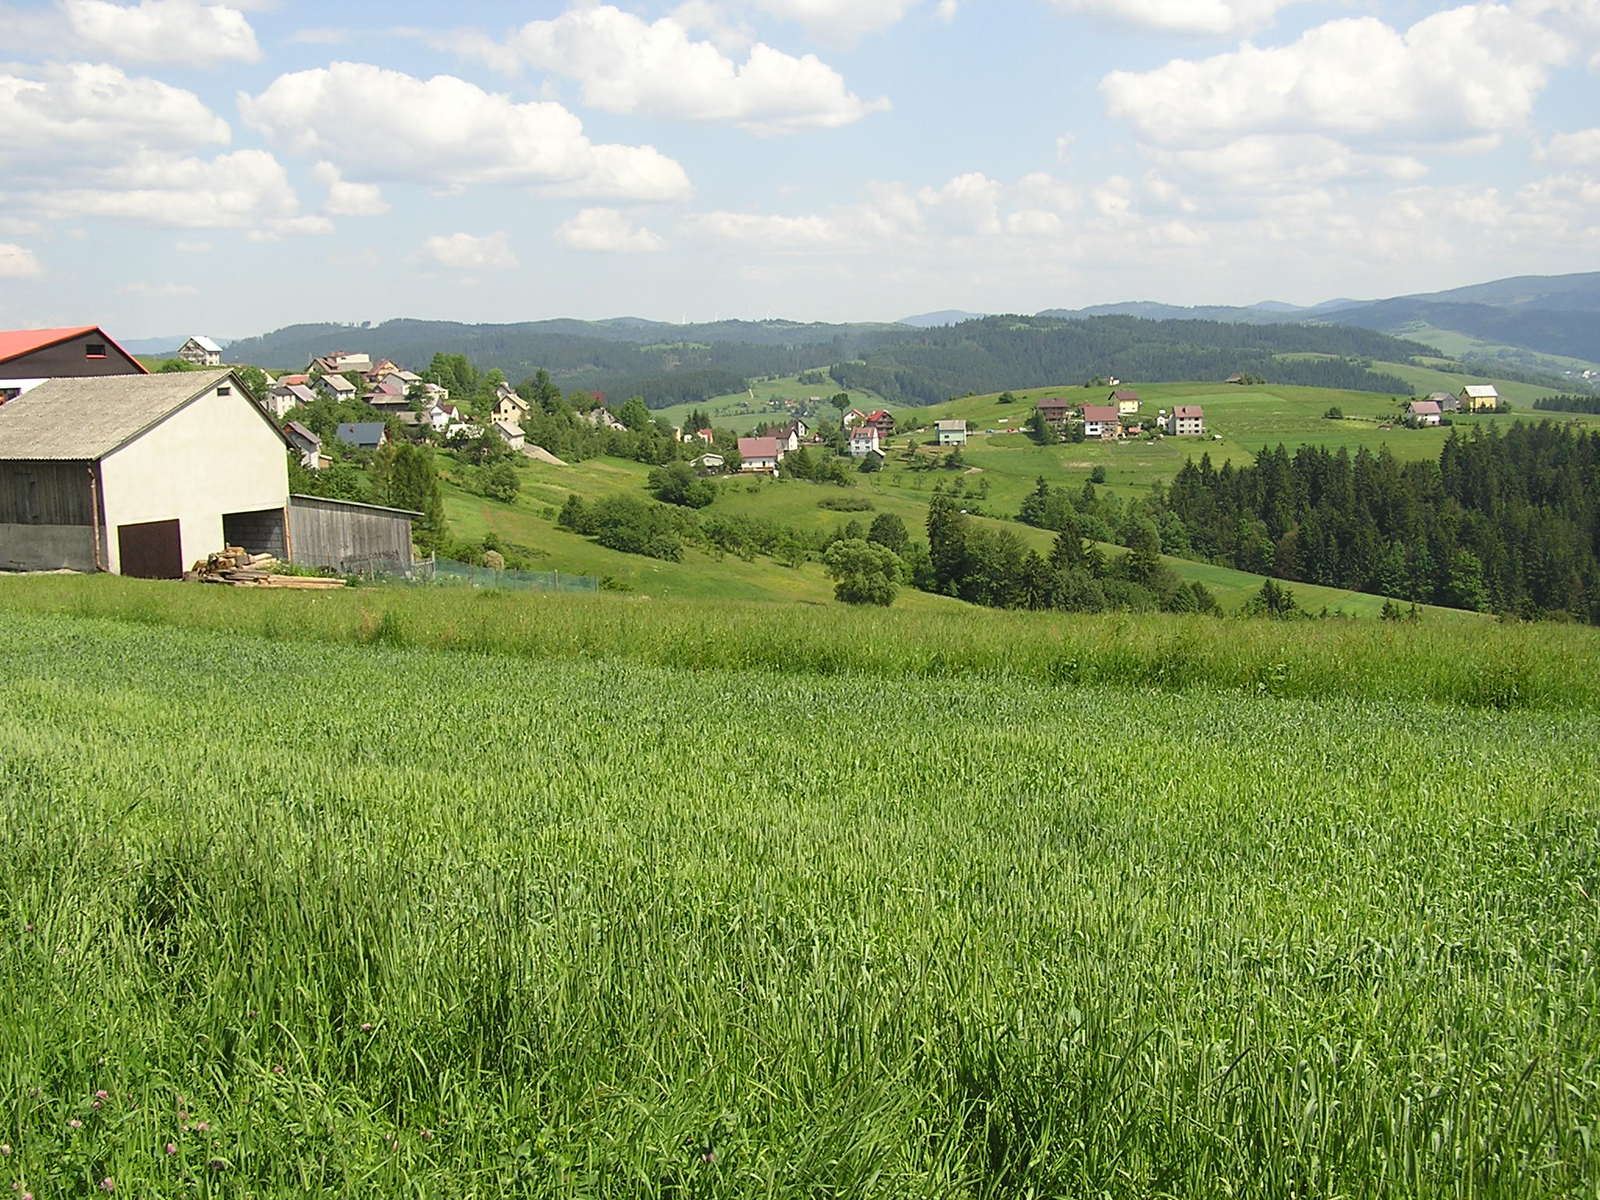 the view is of a hillside in the foreground and with houses on the hillside below